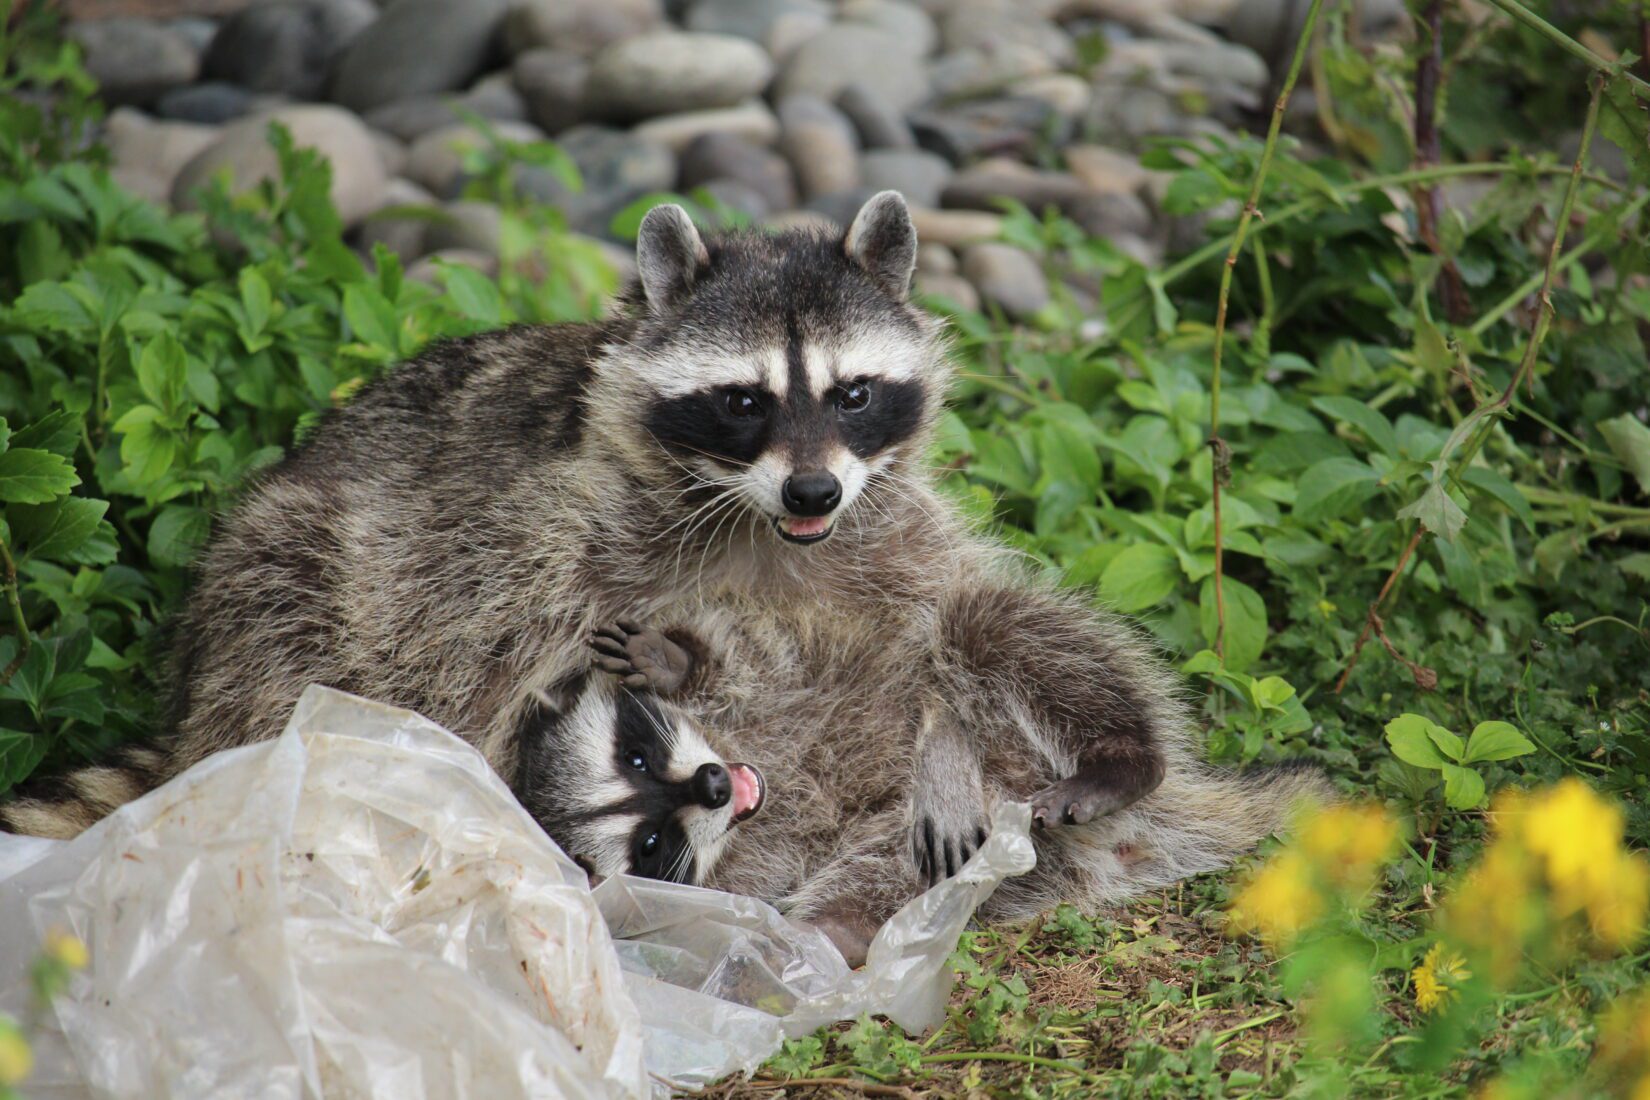 Two raccoons playing in grass near rocks